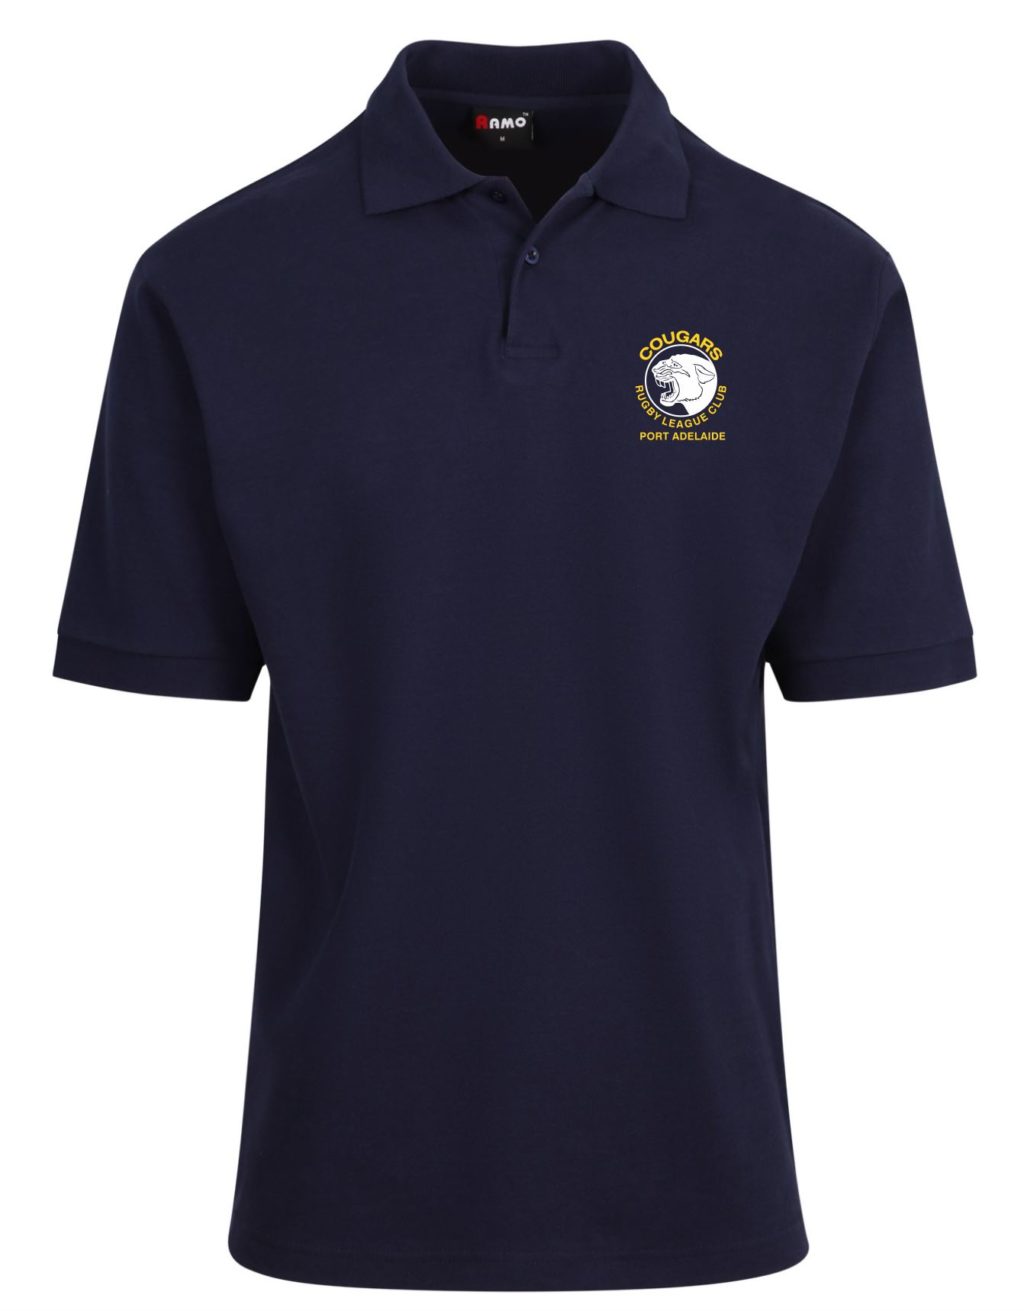 COUGARS RUGBY LEAGUE POLY POLO - Sportscentre